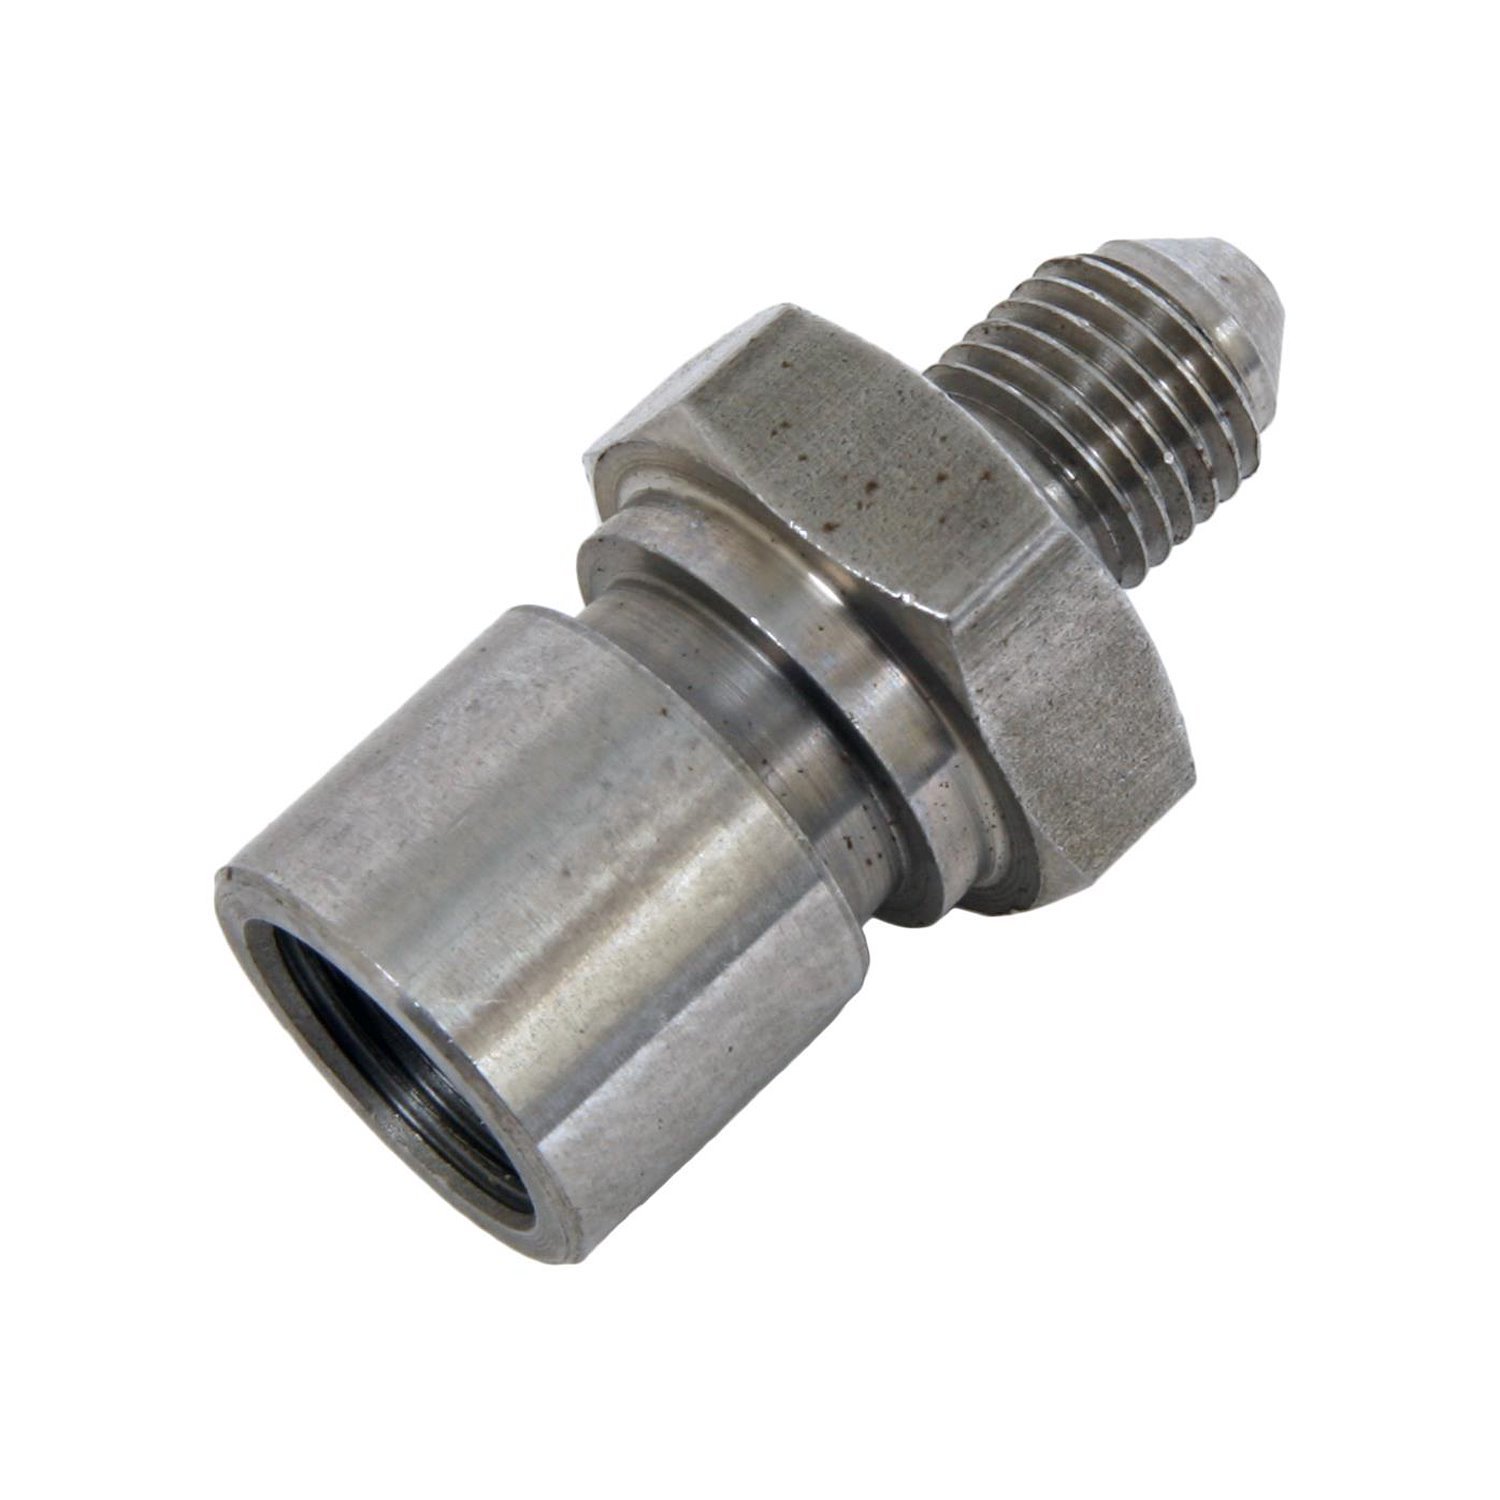 Brake Hose Fitting -3AN Male to 12mm X